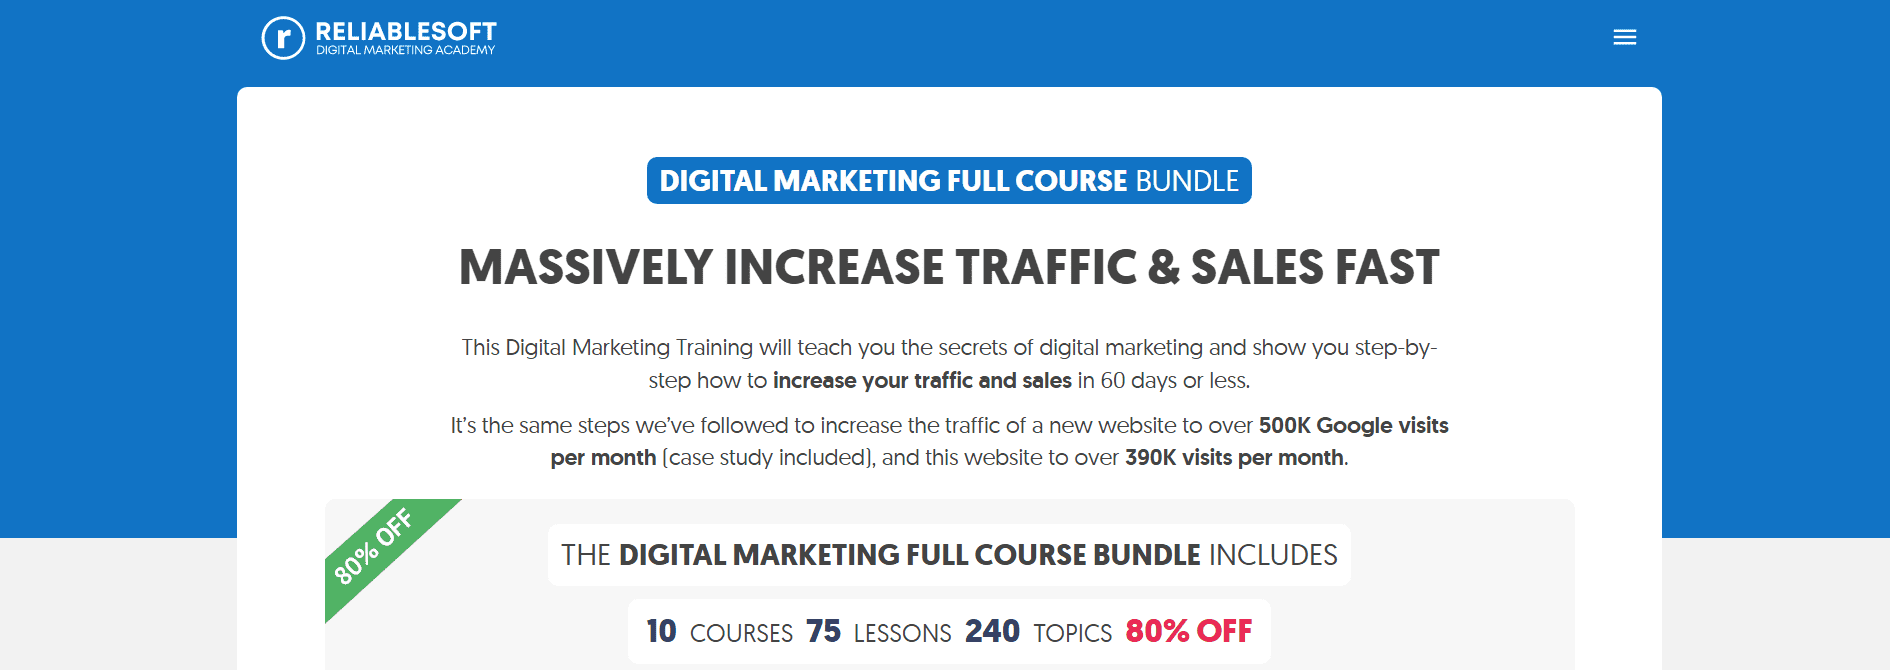 reliablesoft marketing course